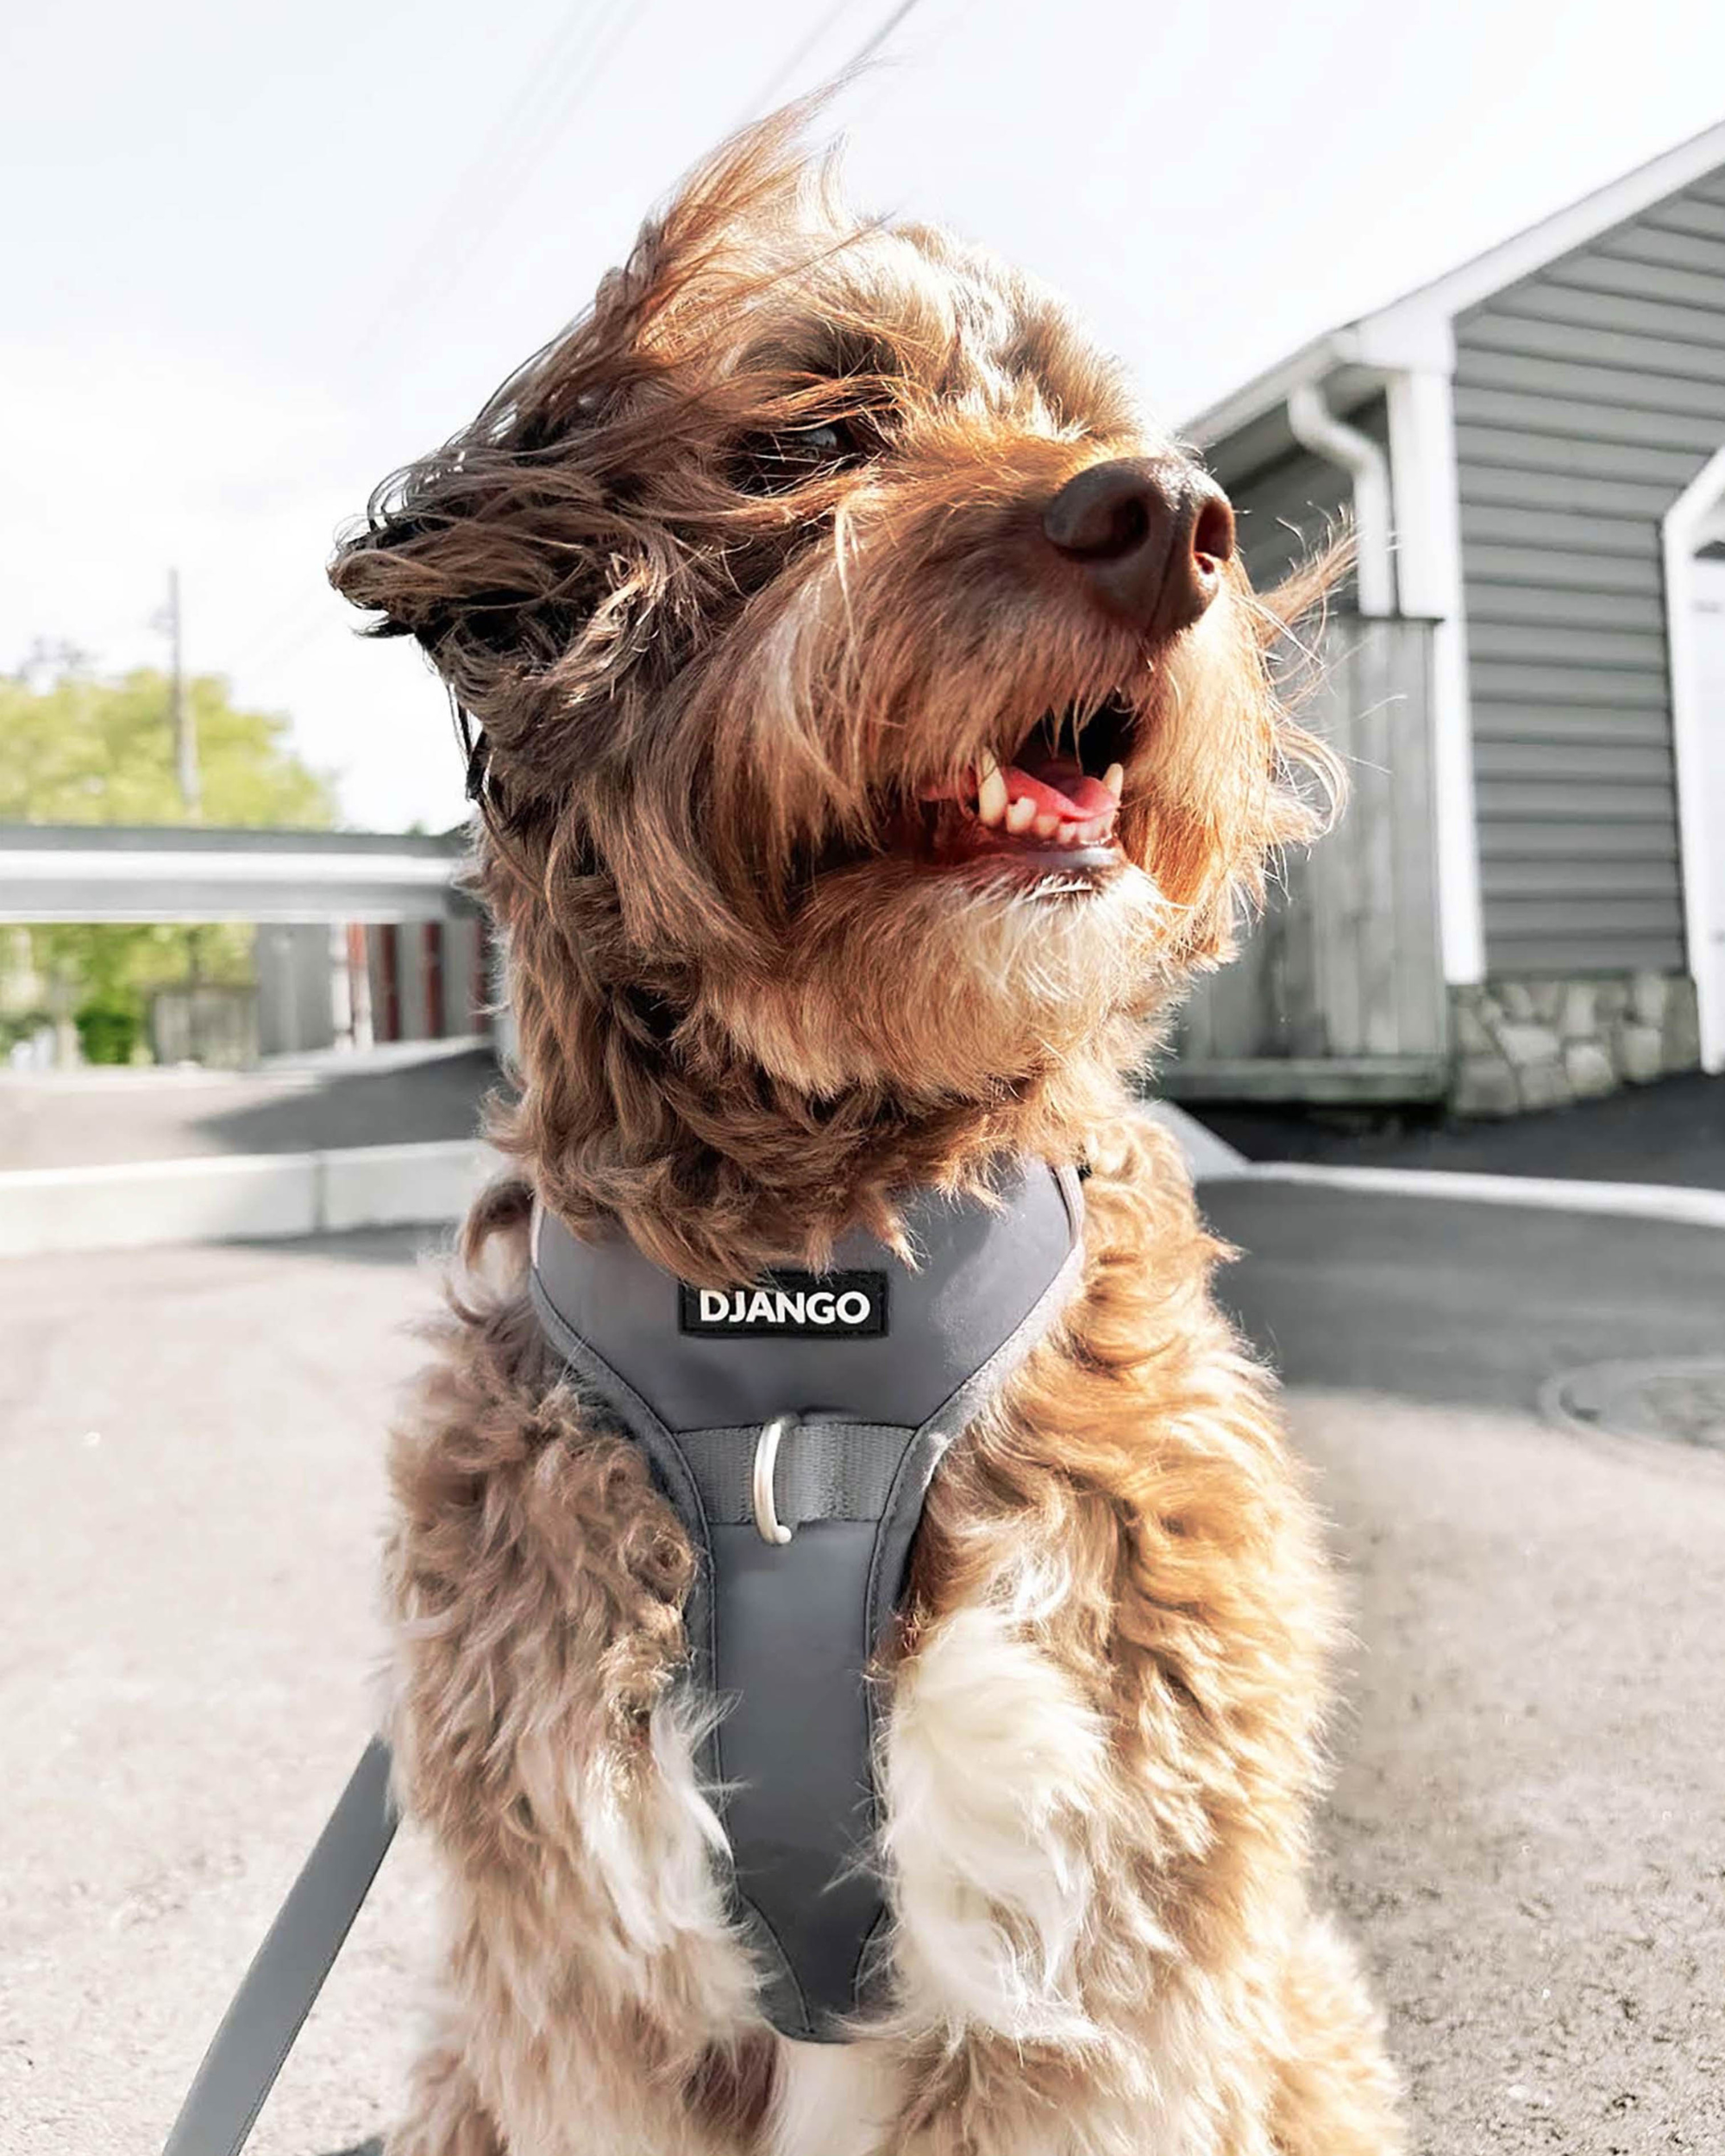 DJANGO Tahoe No Pull Dog Harness in Poppy Seed Gray - Our beautiful Australian shepherd doodle dog furend is wearing his DJANGO no pull dog harness in modern and stylish color Poppy Seed Gray. Key features of DJANGO's Tahoe dog harness include a weather-resistant and padded neoprene exterior, a narrow and deep harness body (to prevent the risk of chafing) reflective piping, and soft webbing. - djangobrand.com